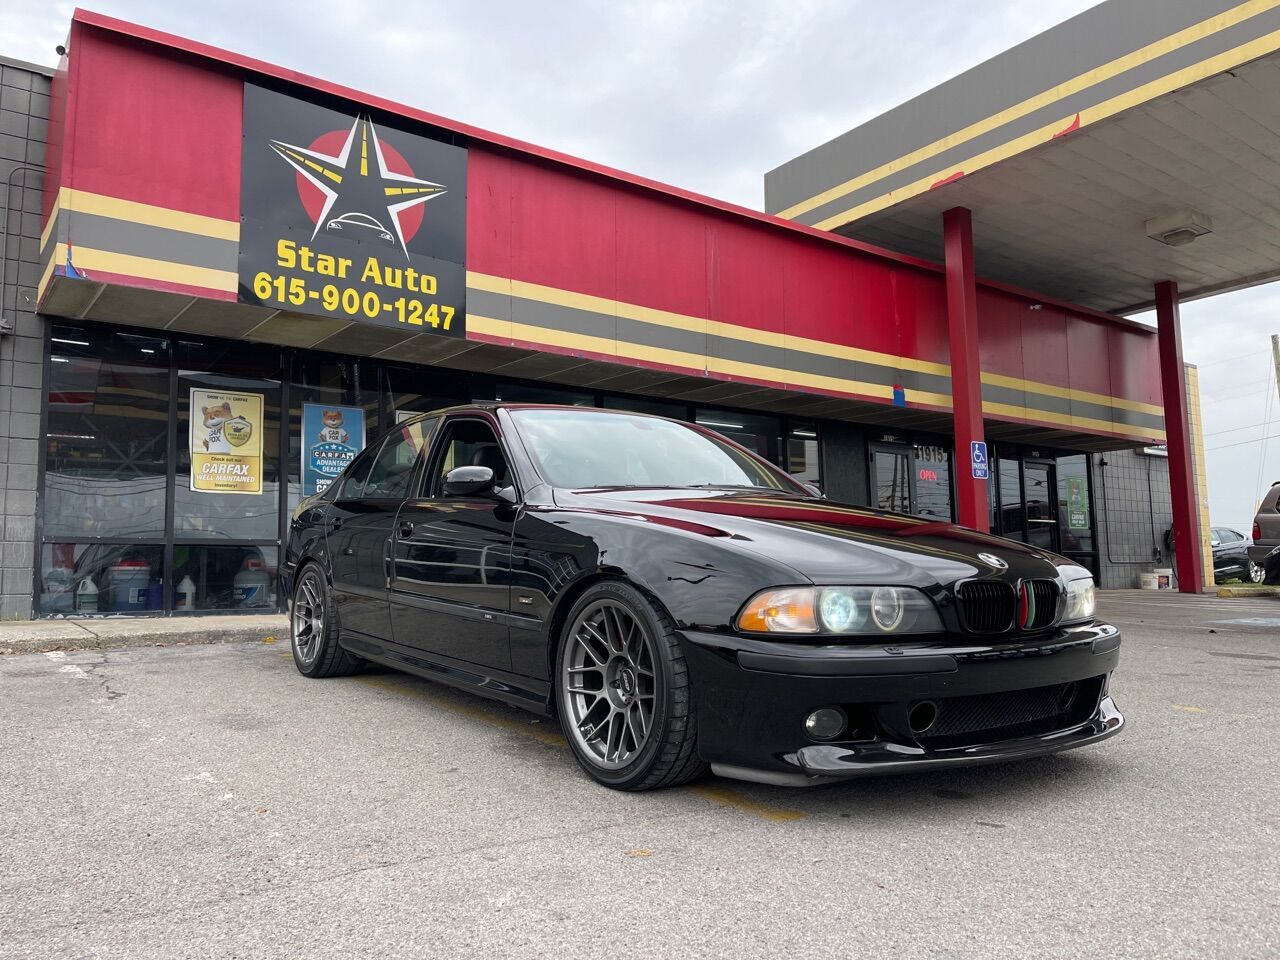 Used 2000 BMW M5 for Sale Right Now - Autotrader